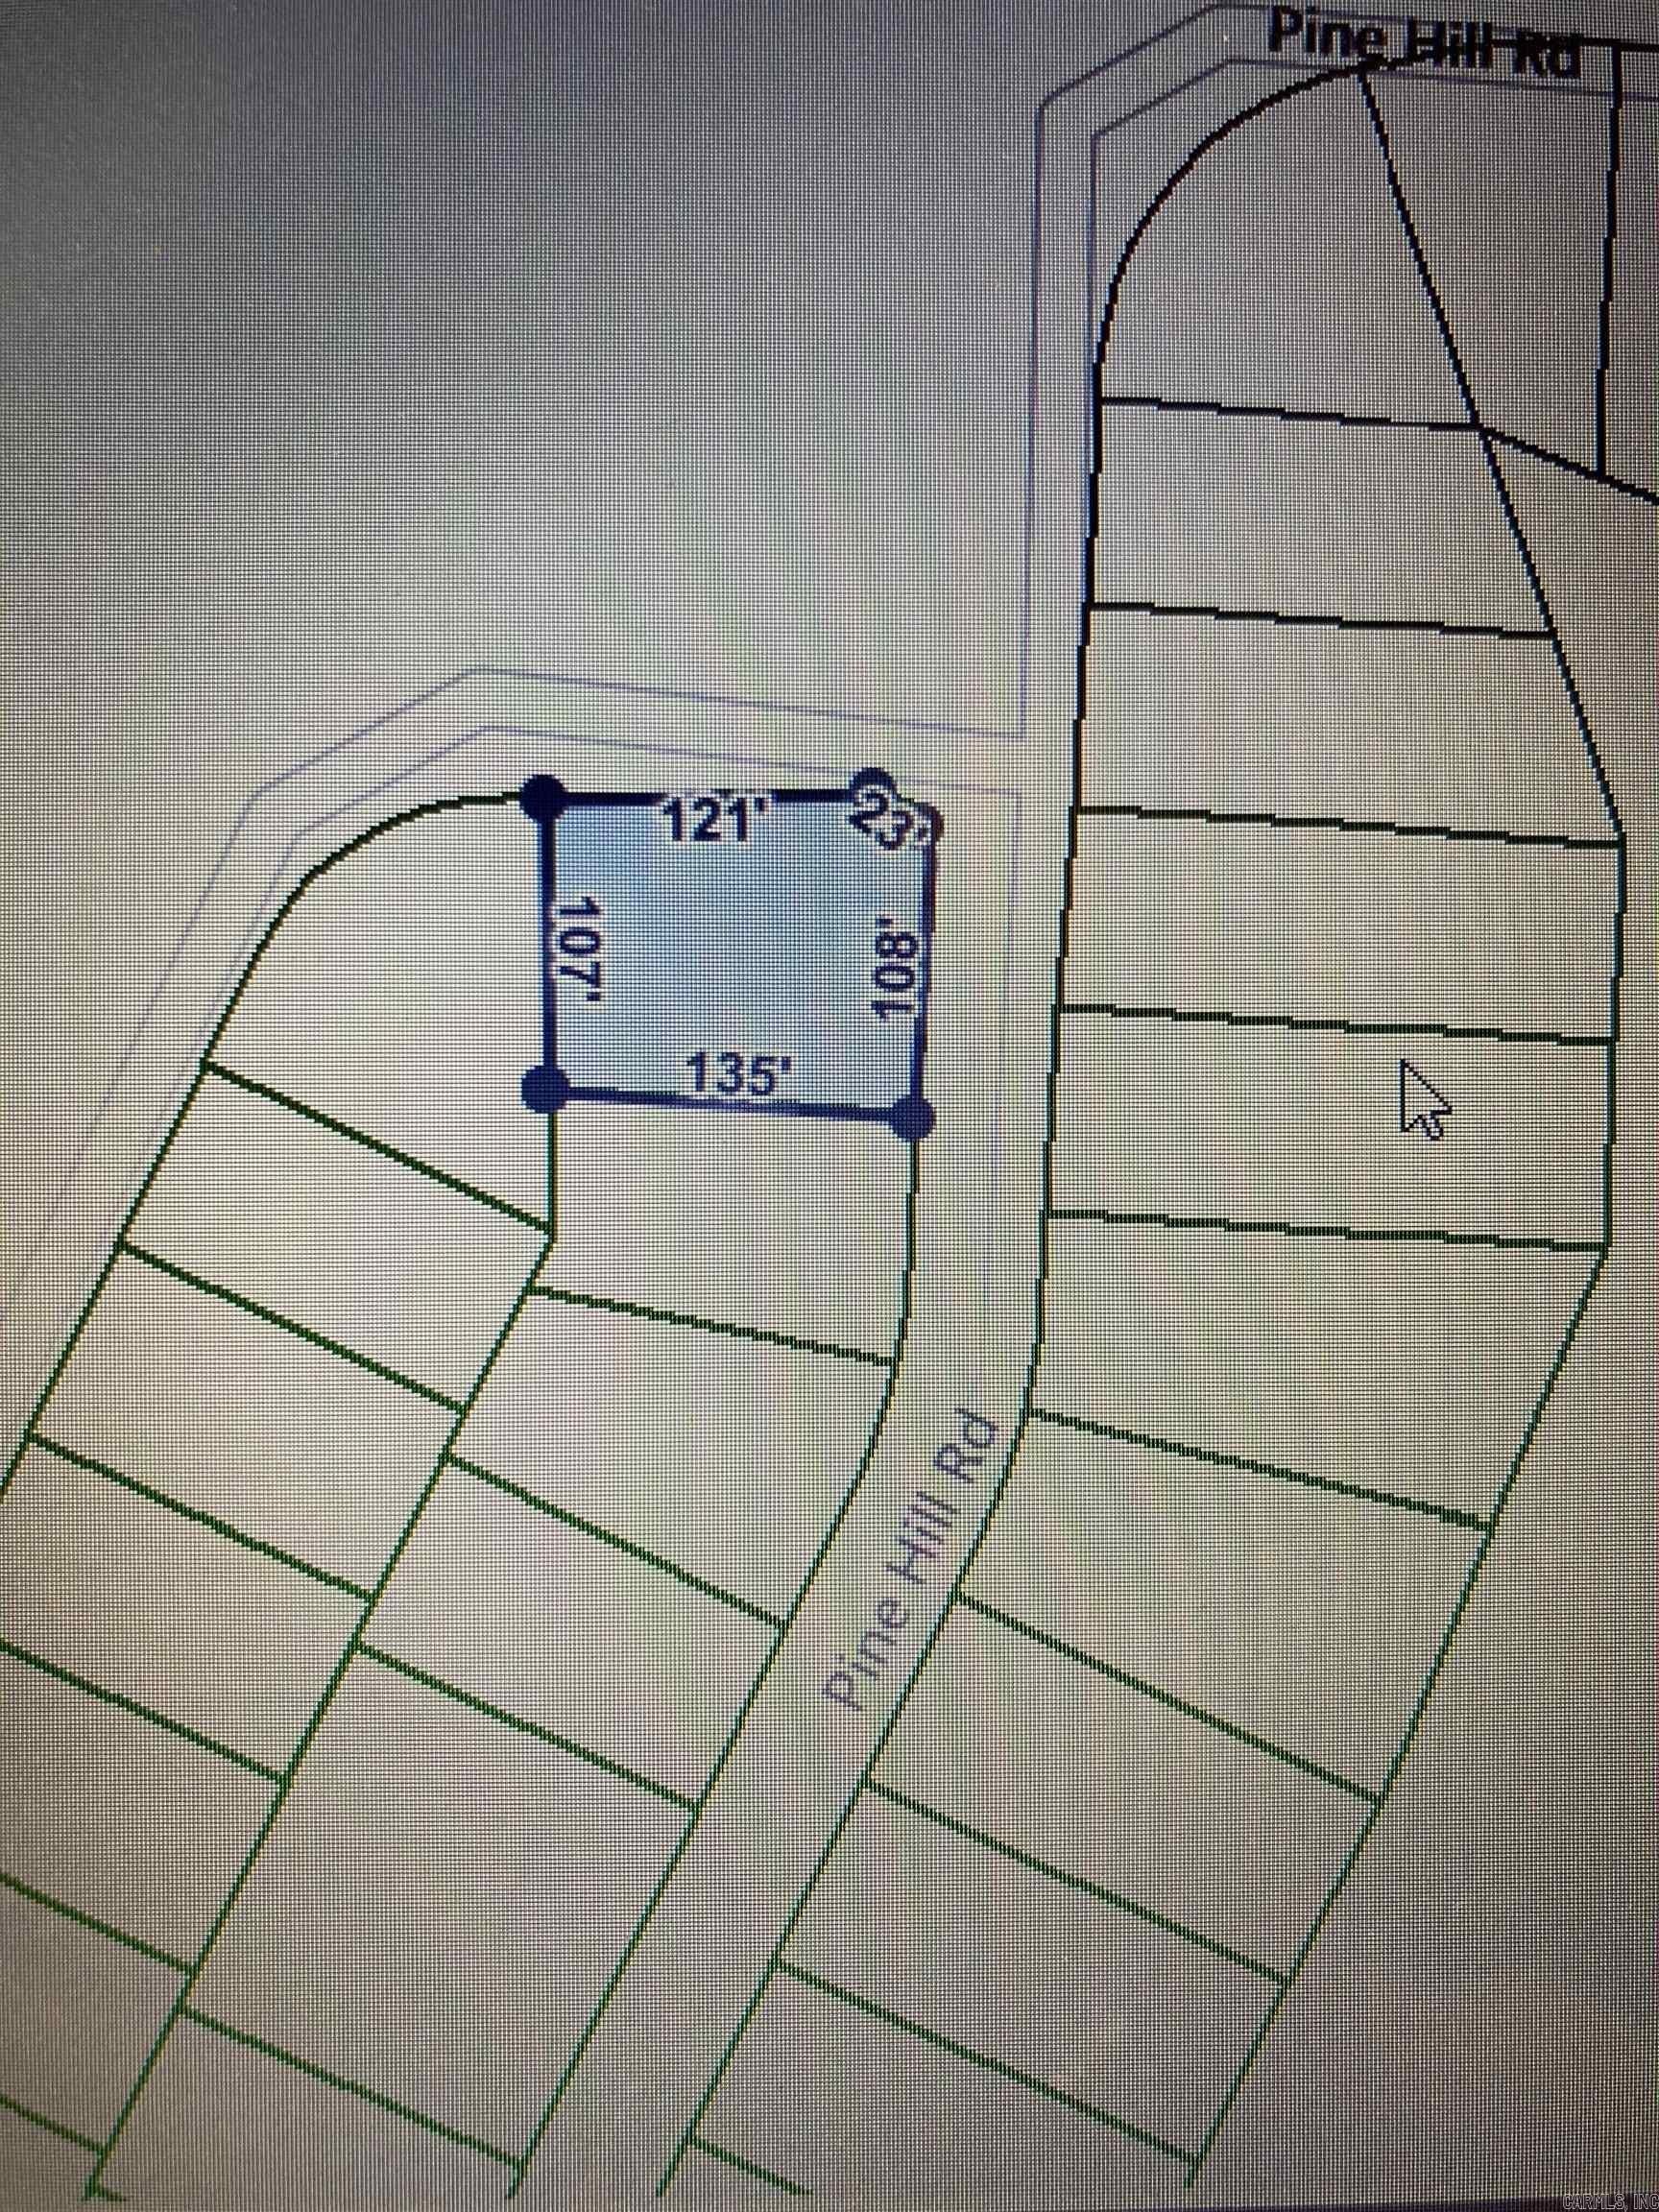 1. Lot392&amp;393 Bk15 Valley View Drive